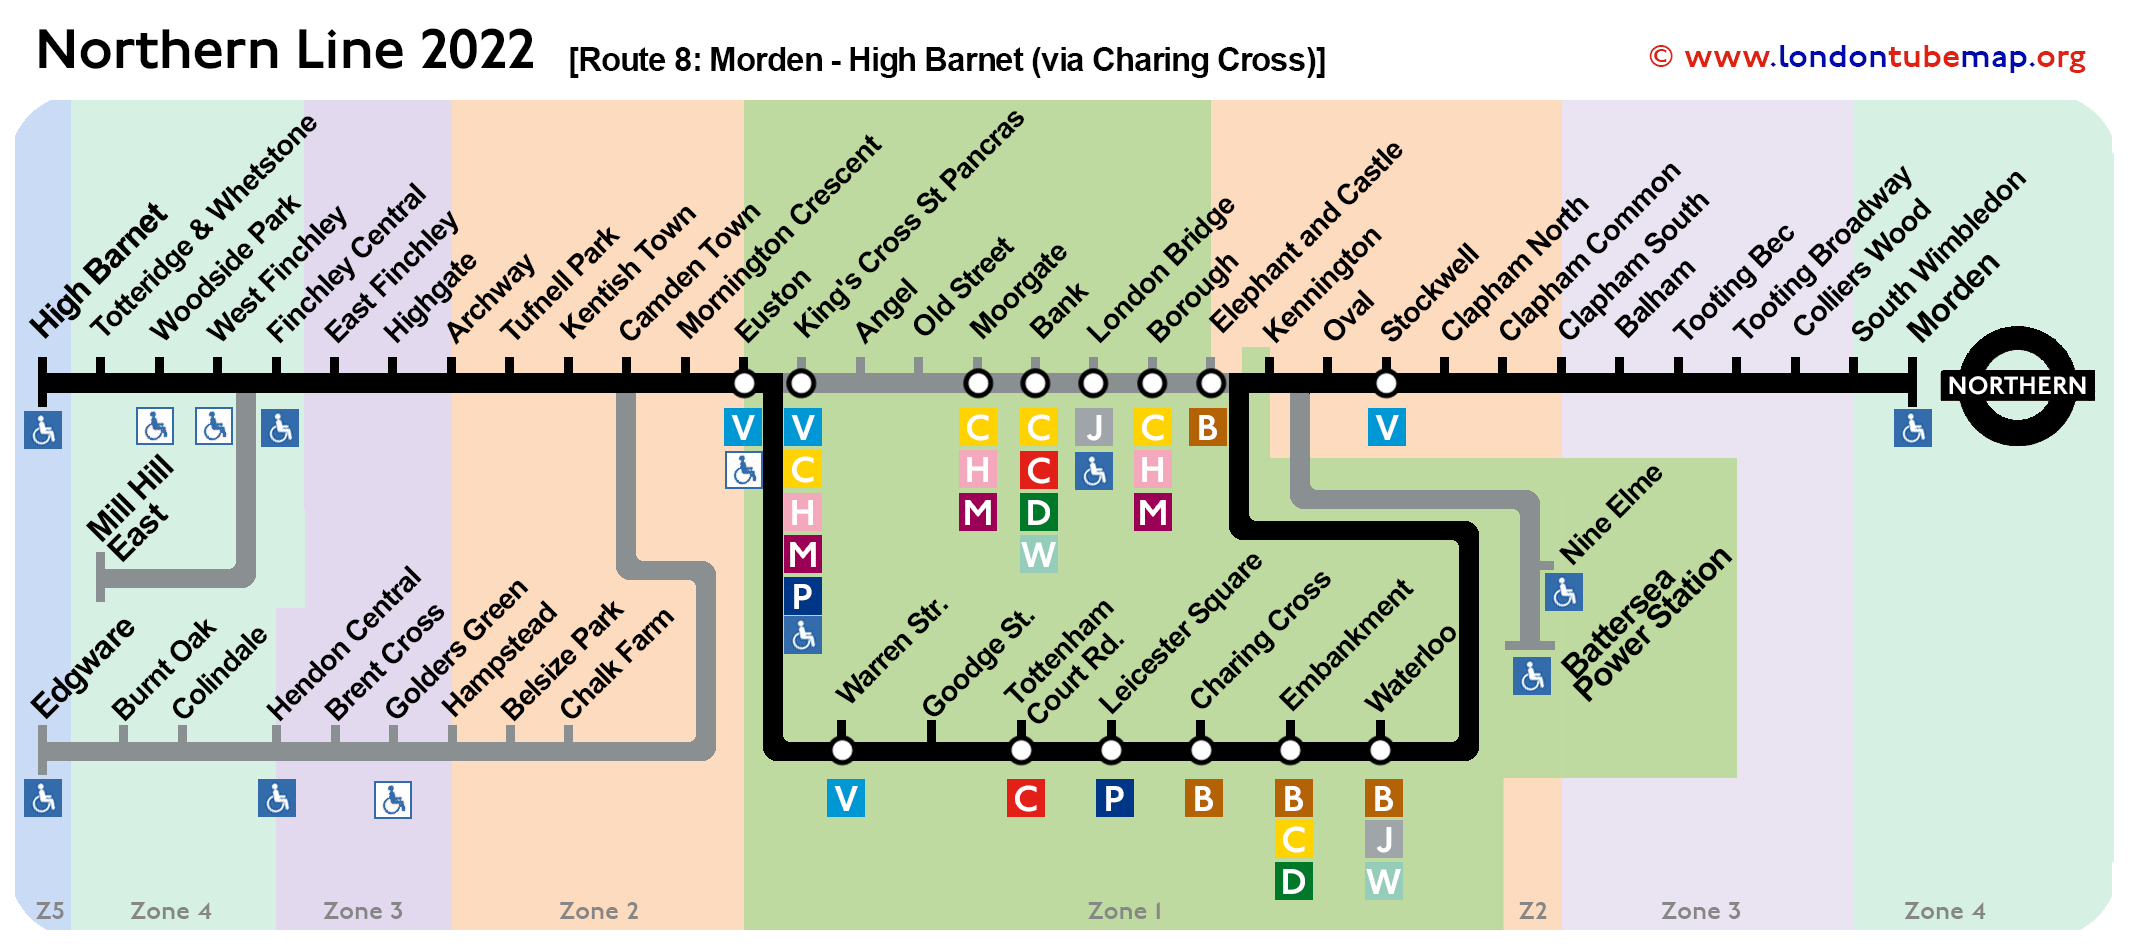 Northern line map 2022 Route-8 Morden High Barnet via Charing Cross